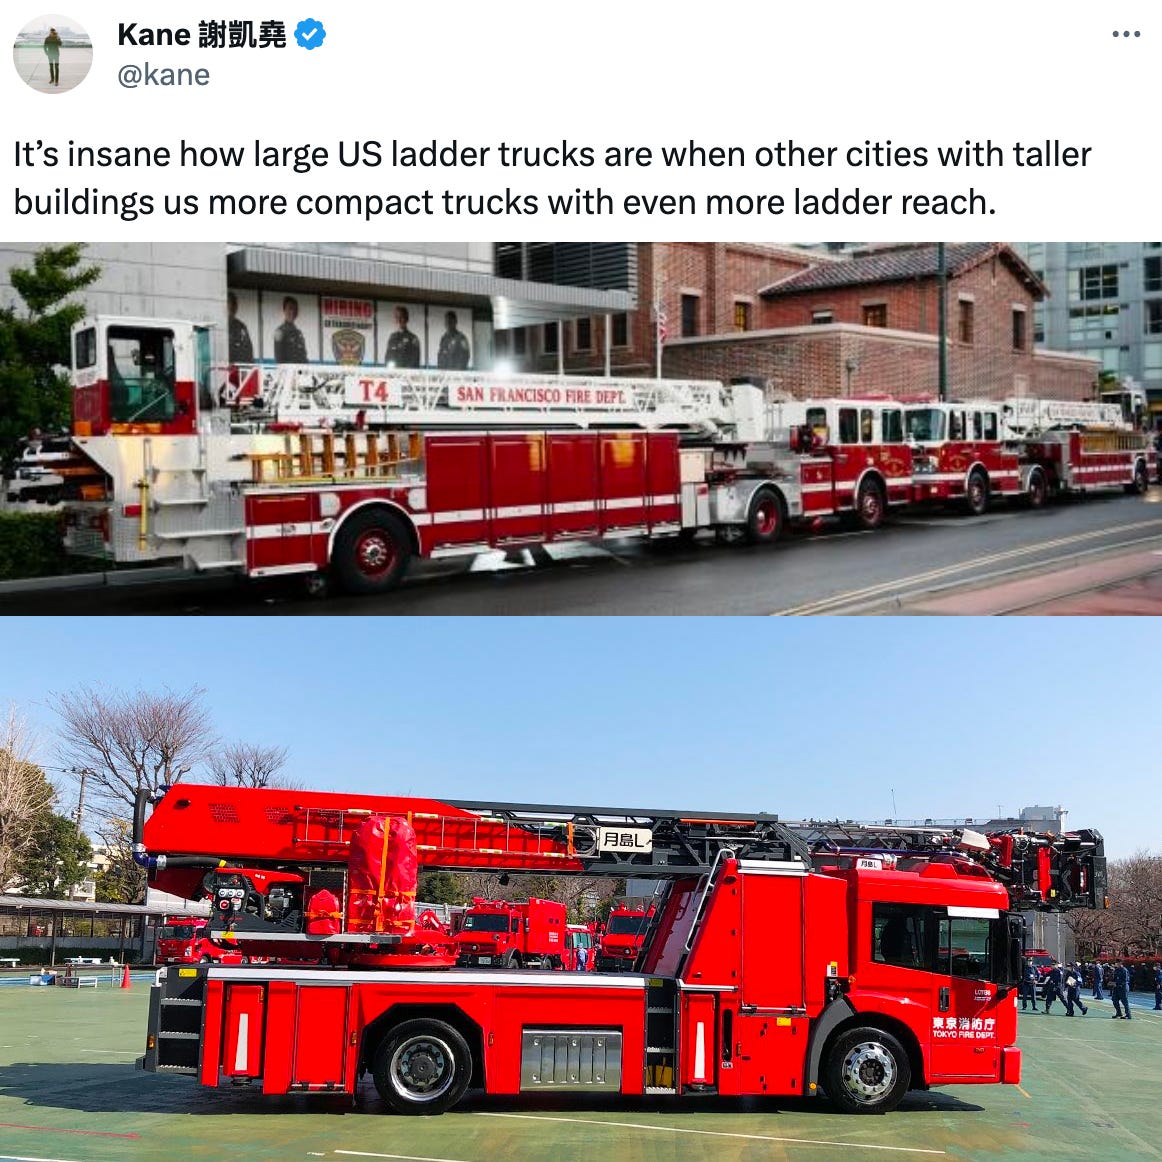 @kane It’s insane how large US ladder trucks are when other cities with taller buildings us more compact trucks with even more ladder reach.